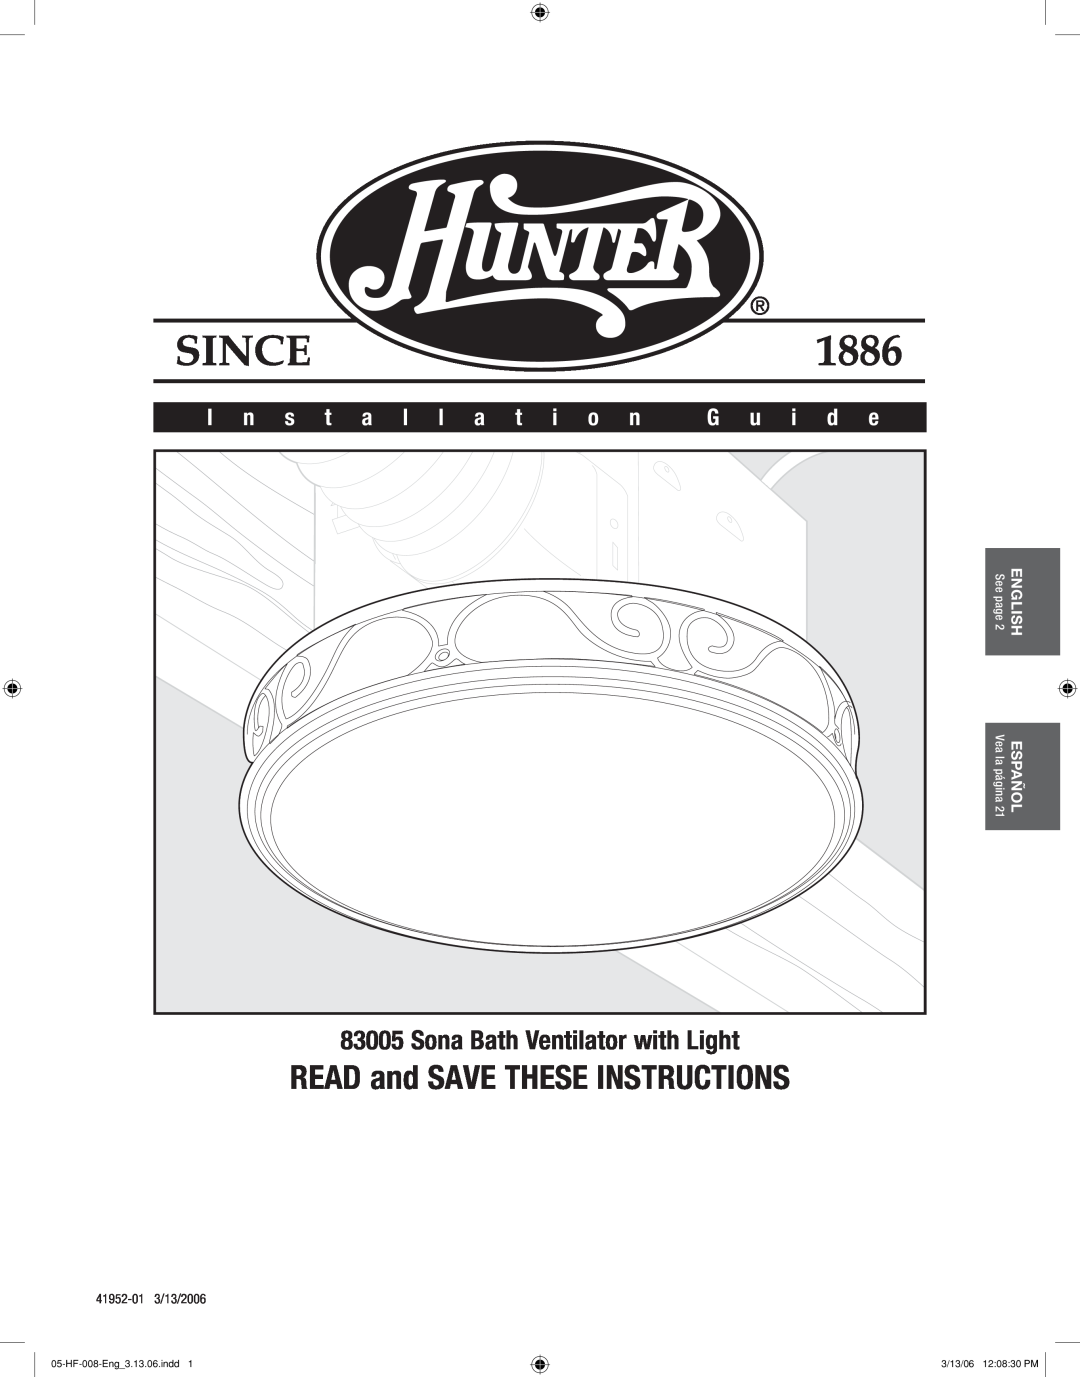 Hunter,R.F 83005 manual READ and SAVE THESE INSTRUCTIONS, Sona Bath Ventilator with Light, I n s t a l l a t i o n 